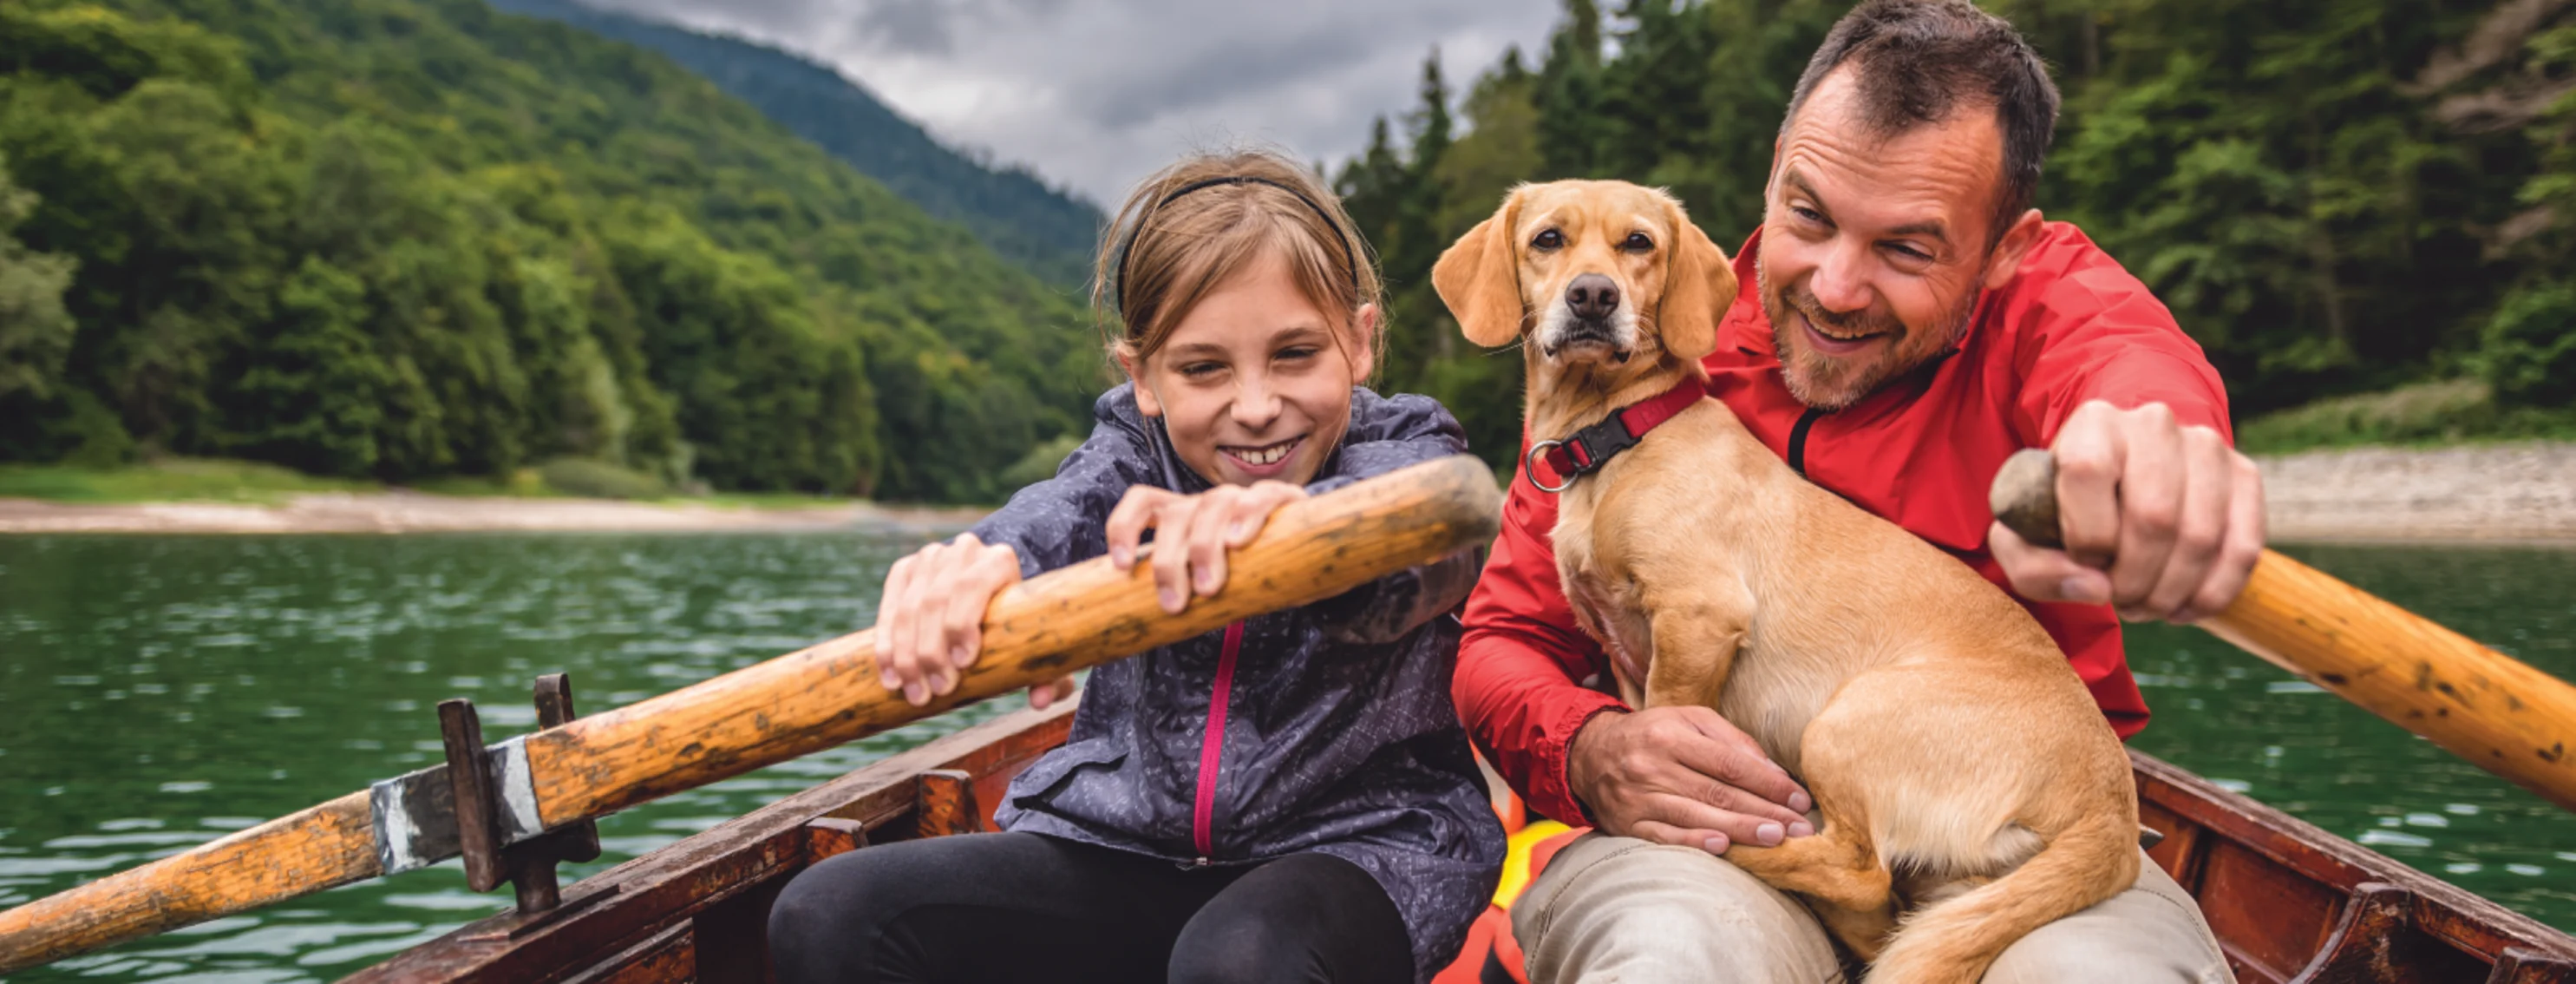 Outdoor dog in boat with family rowing